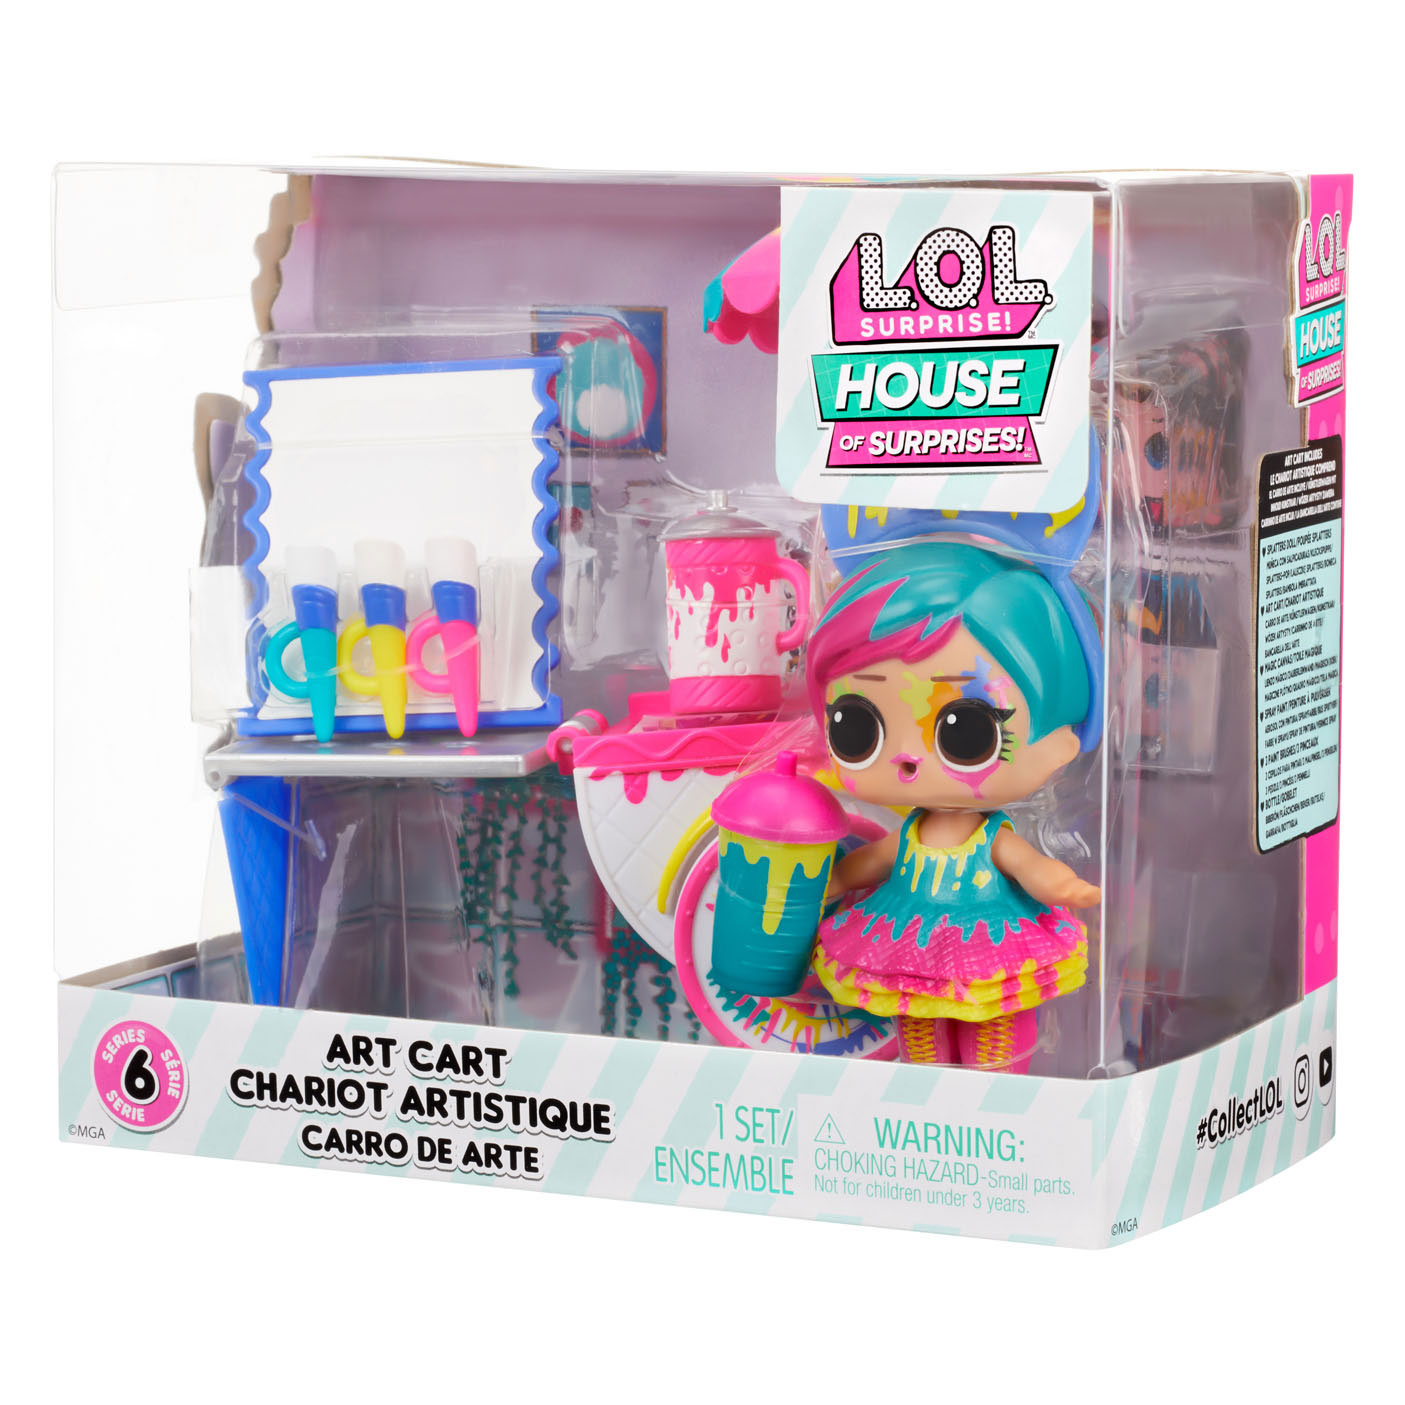 OMG Art Cart Playset Splatters Collectible Doll – L.O.L. Surprise